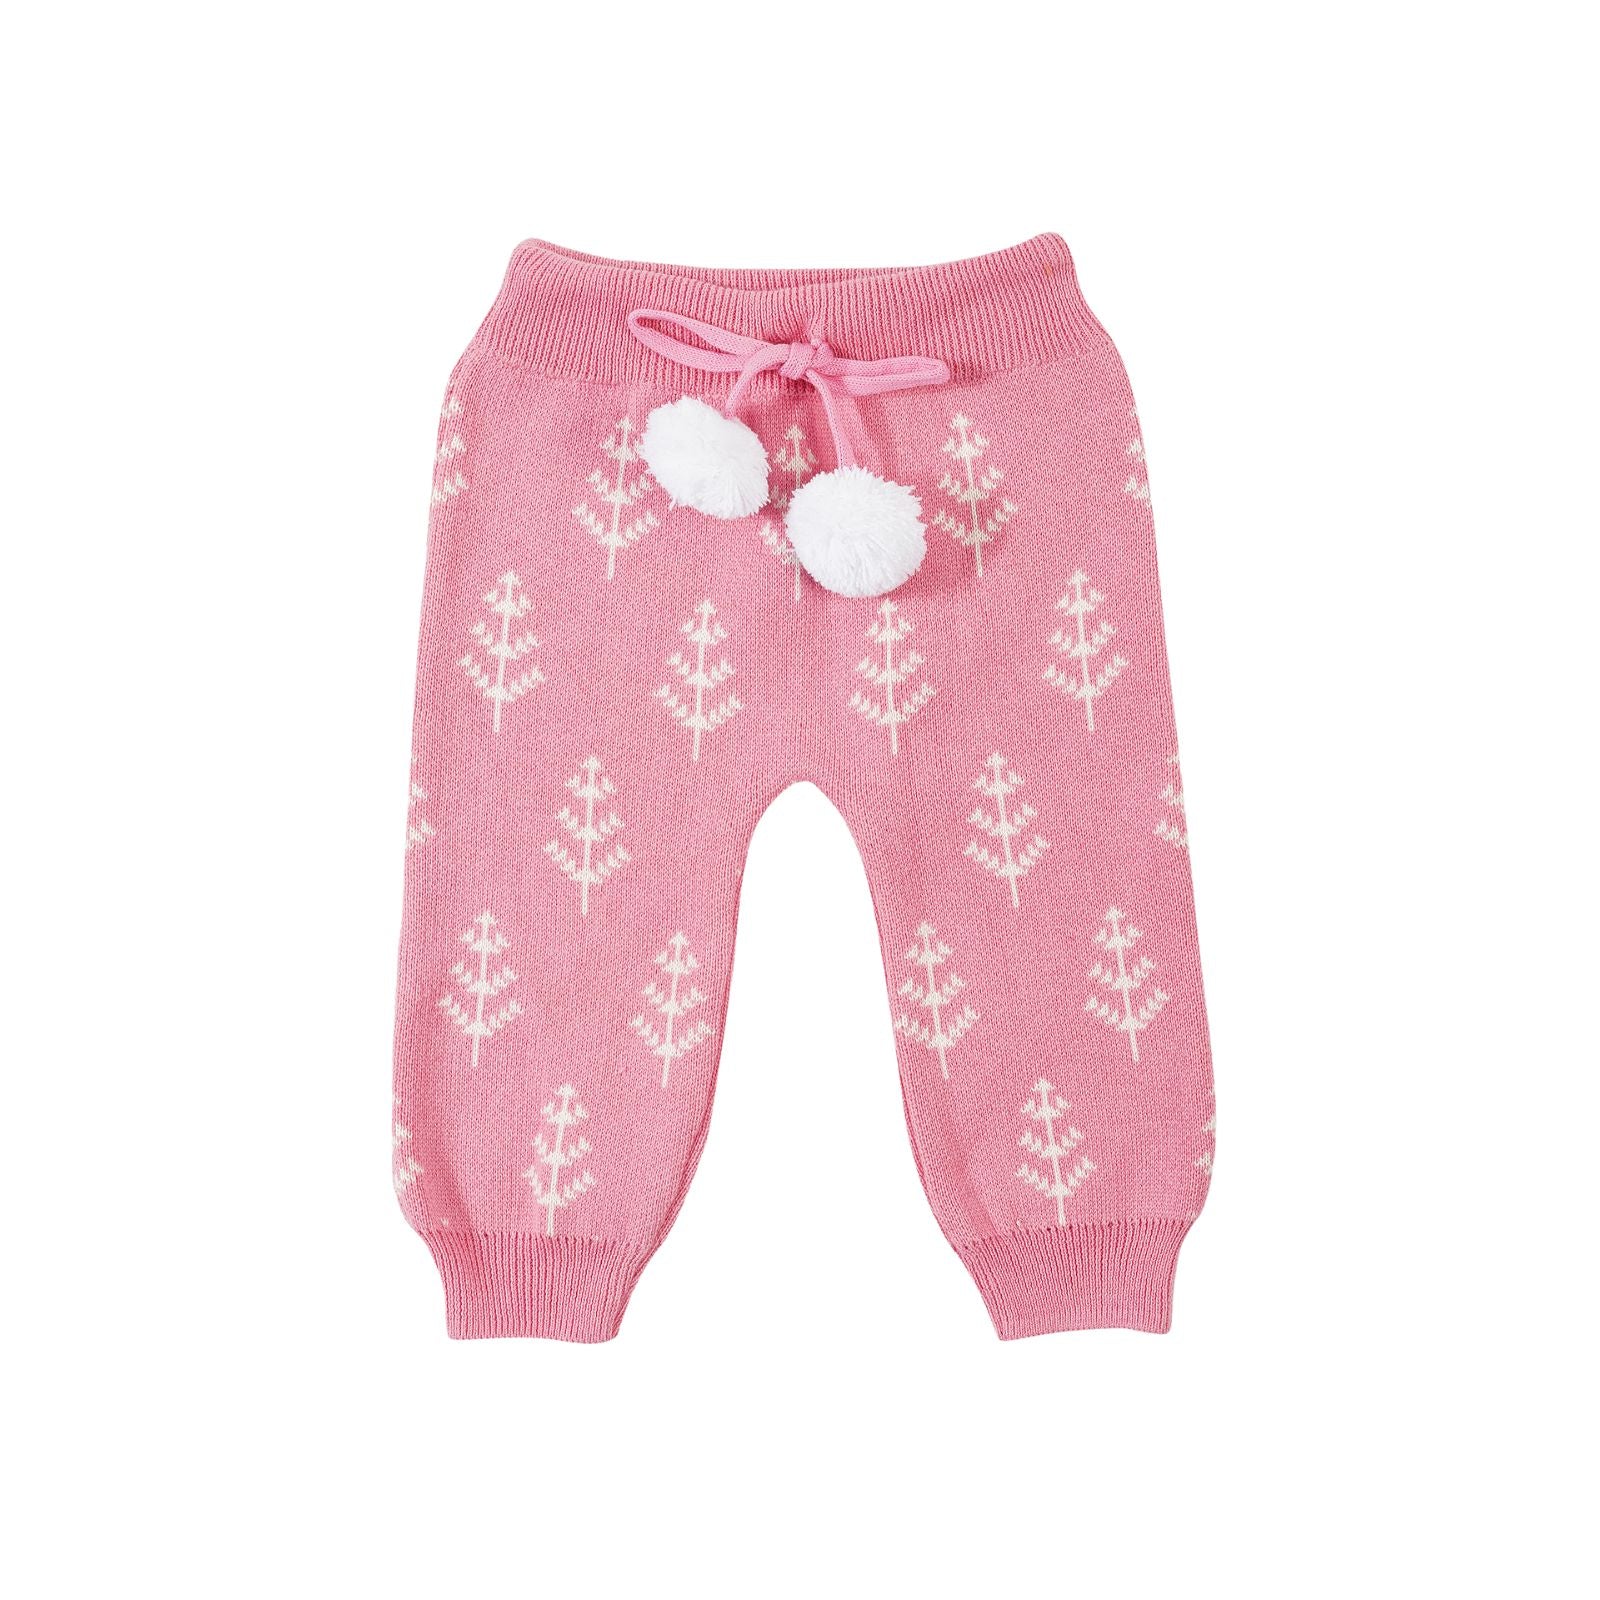 Adorable Bear Family Sweater Set of 2 - Pink